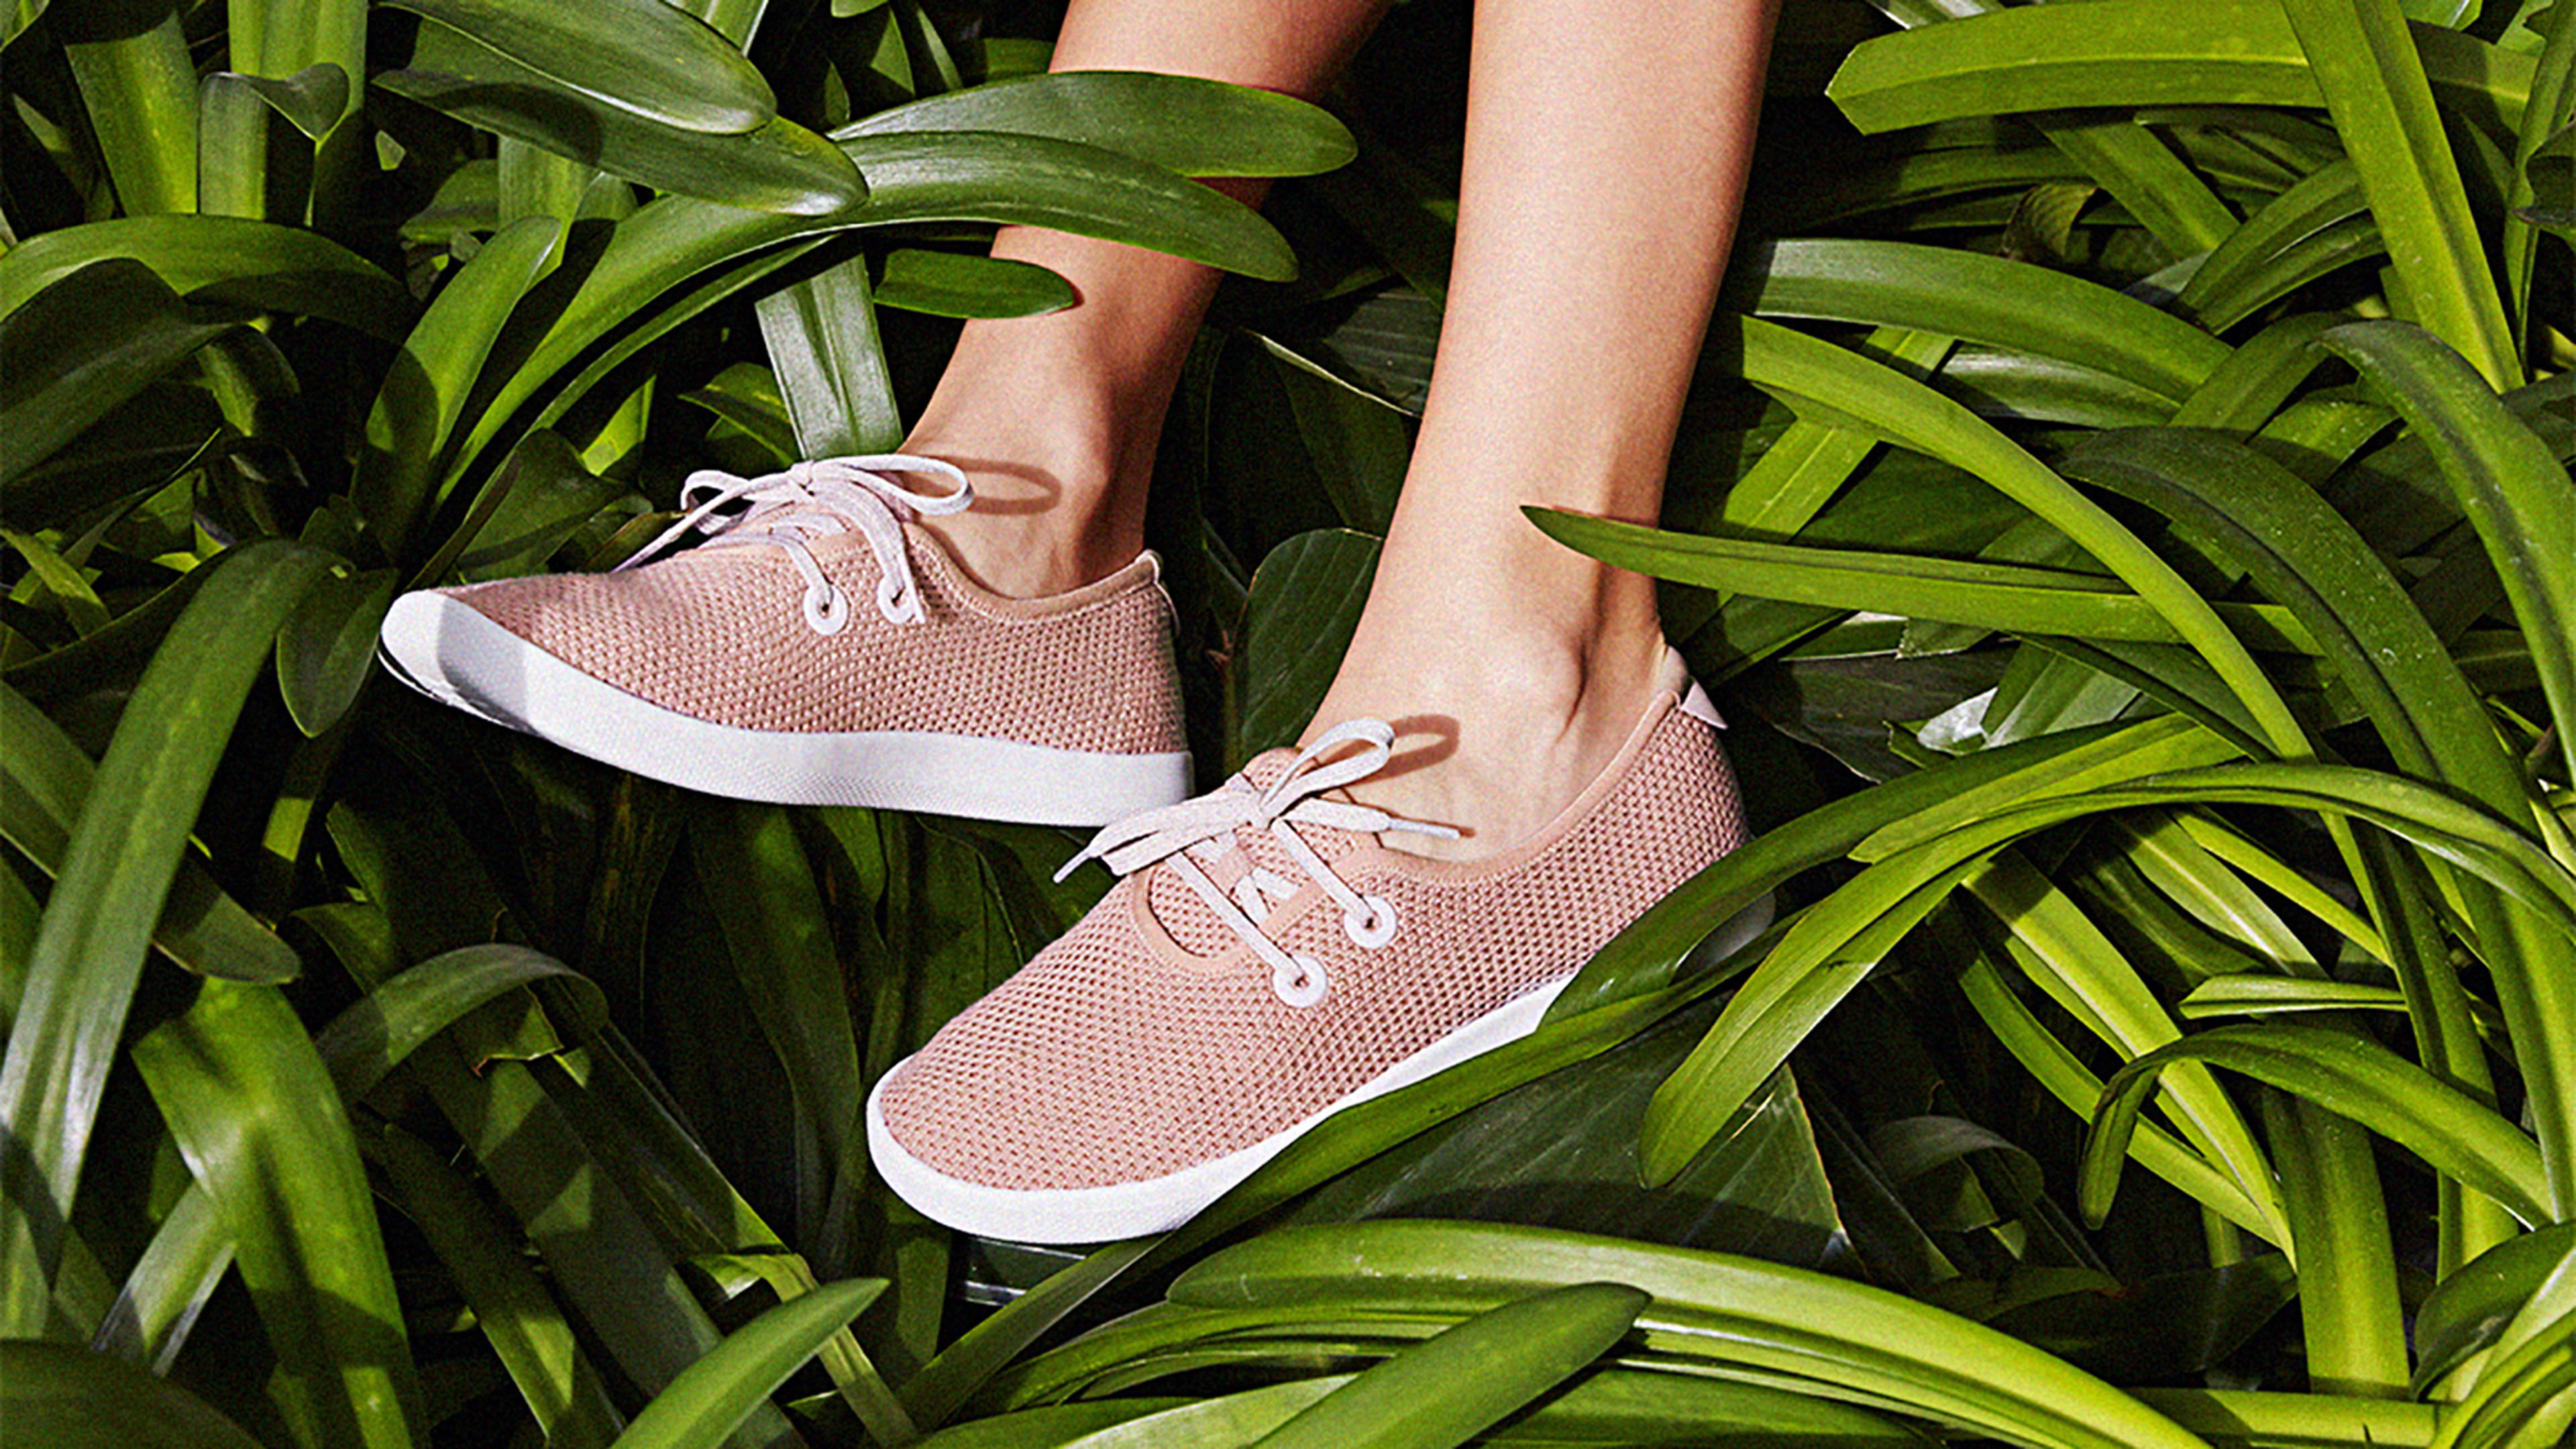 Allbirds Just Invented Summertime Sneakers That Are Actually Made Out Of Trees